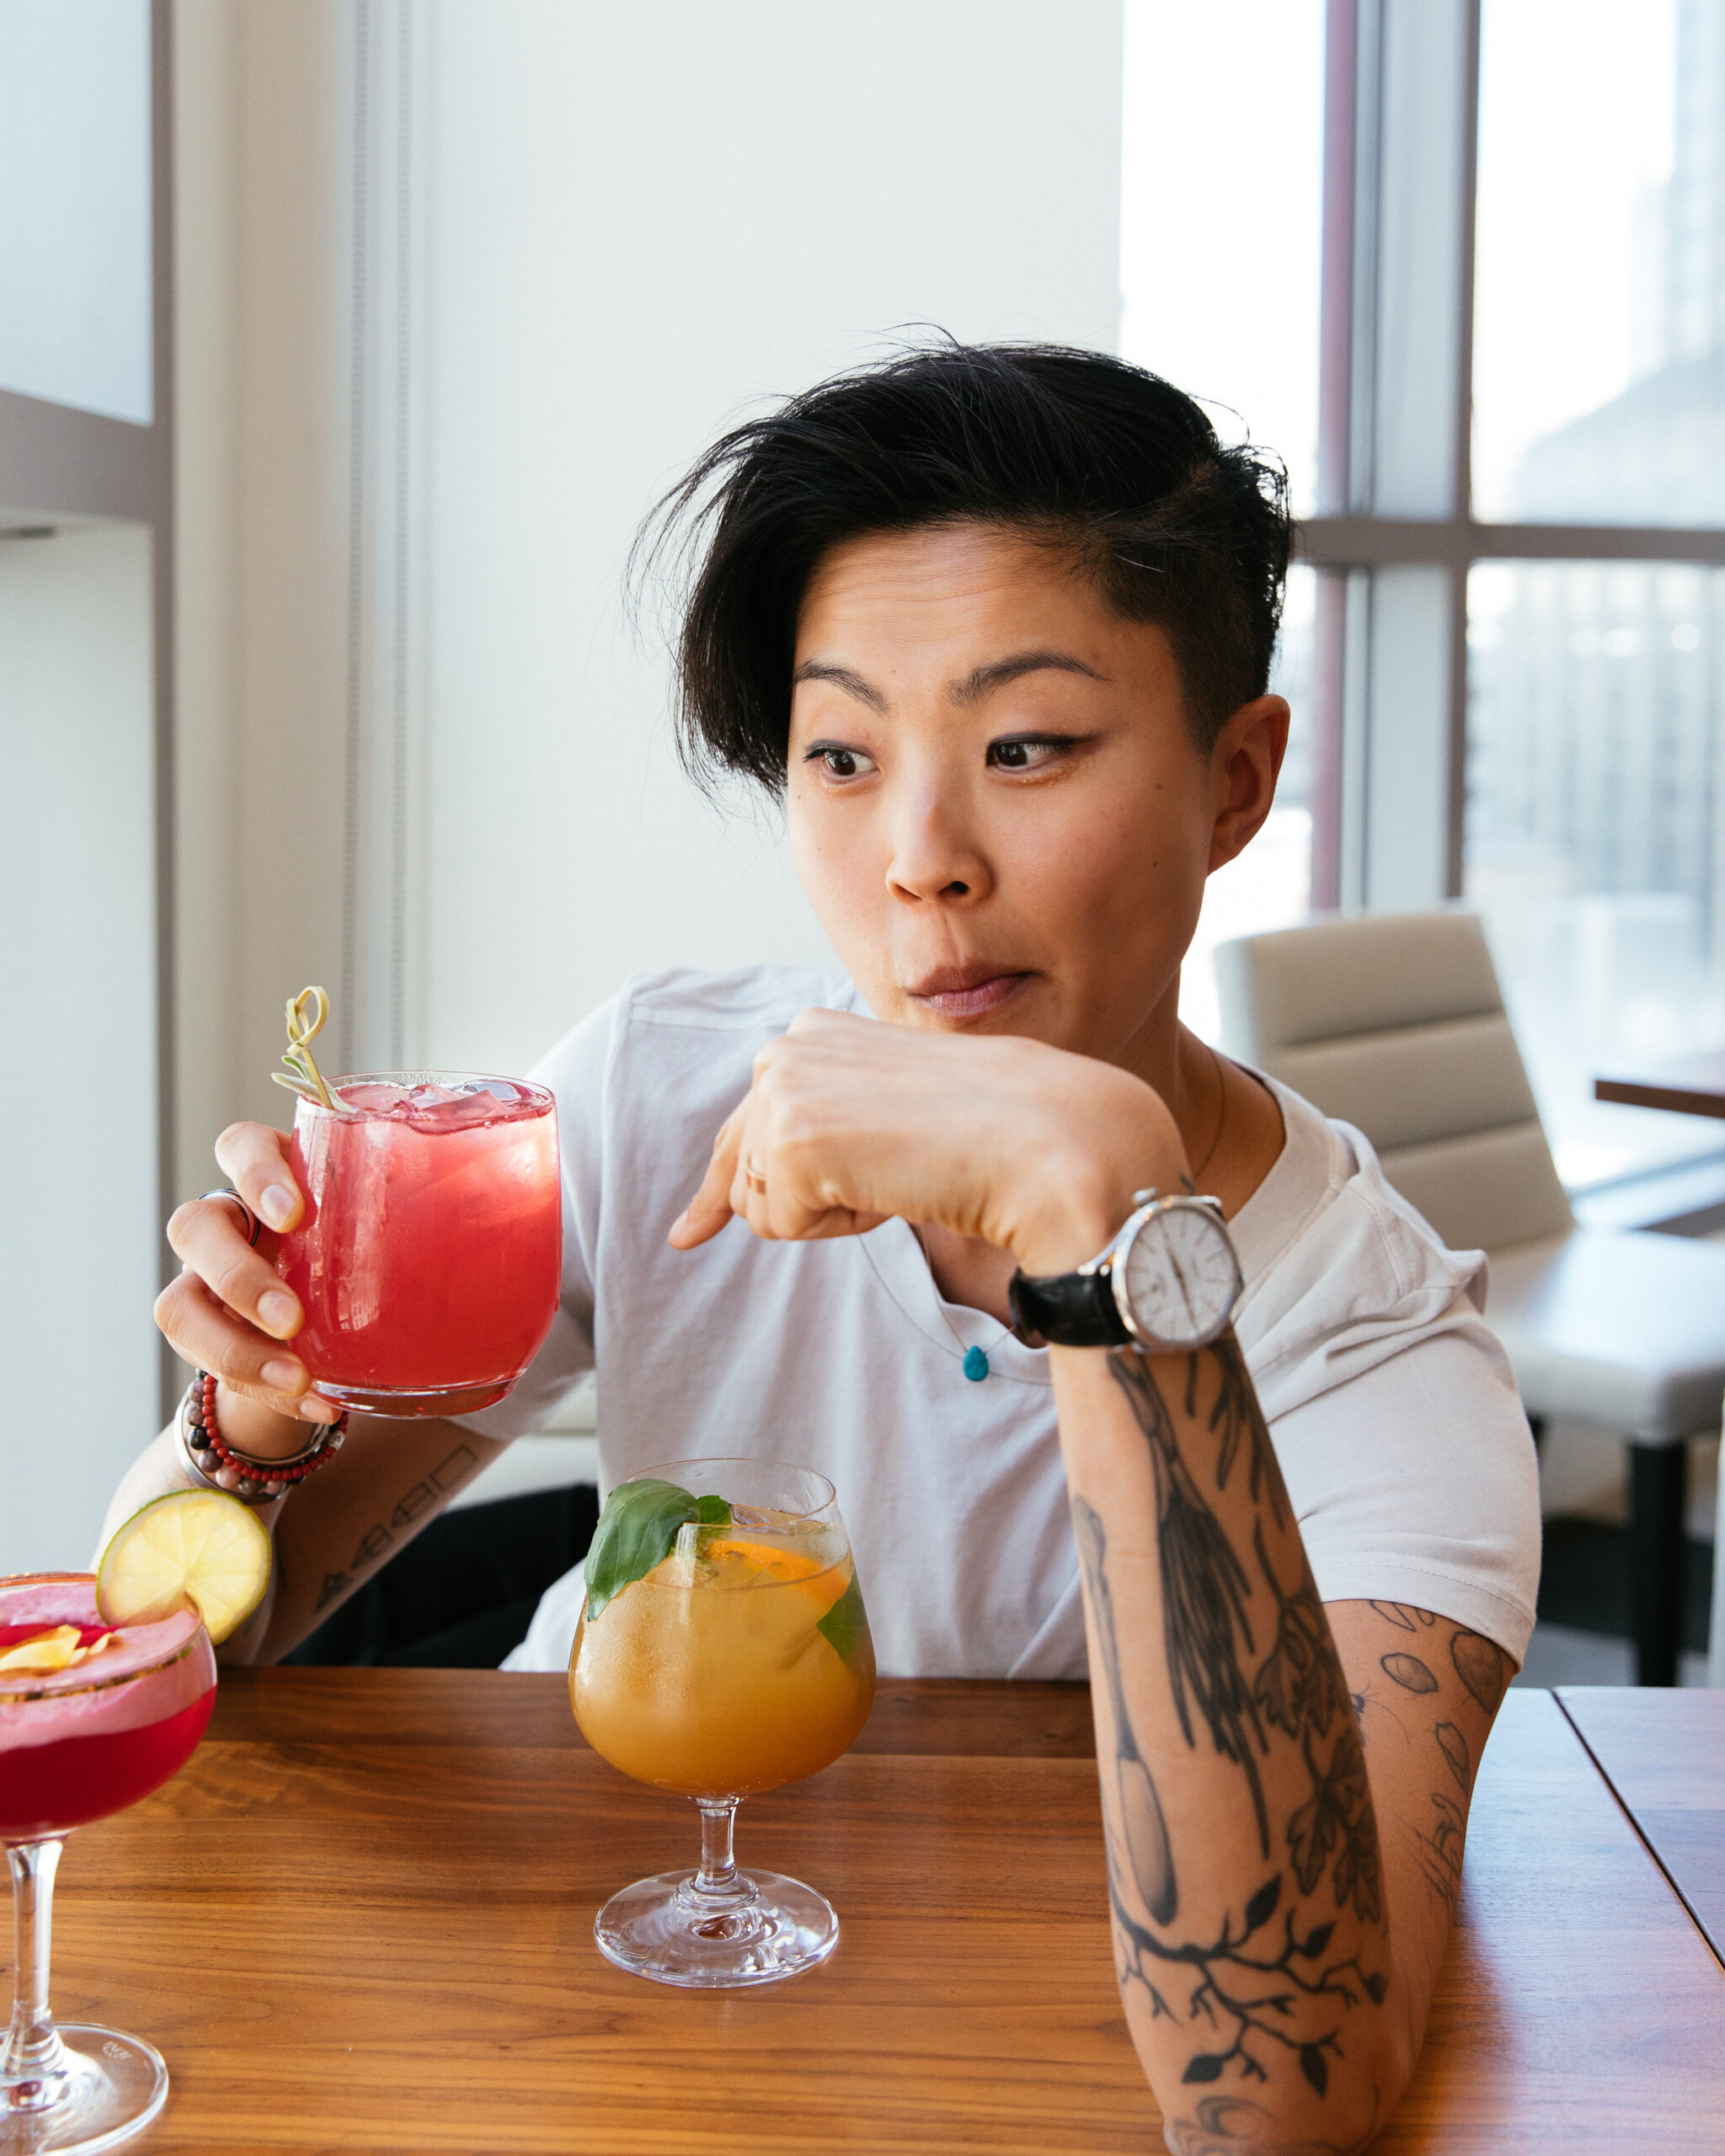 Top Chef winner Kristin Kish is captured eyeing up a refreshing cocktail in this photo by Sandy Noto for McCormick